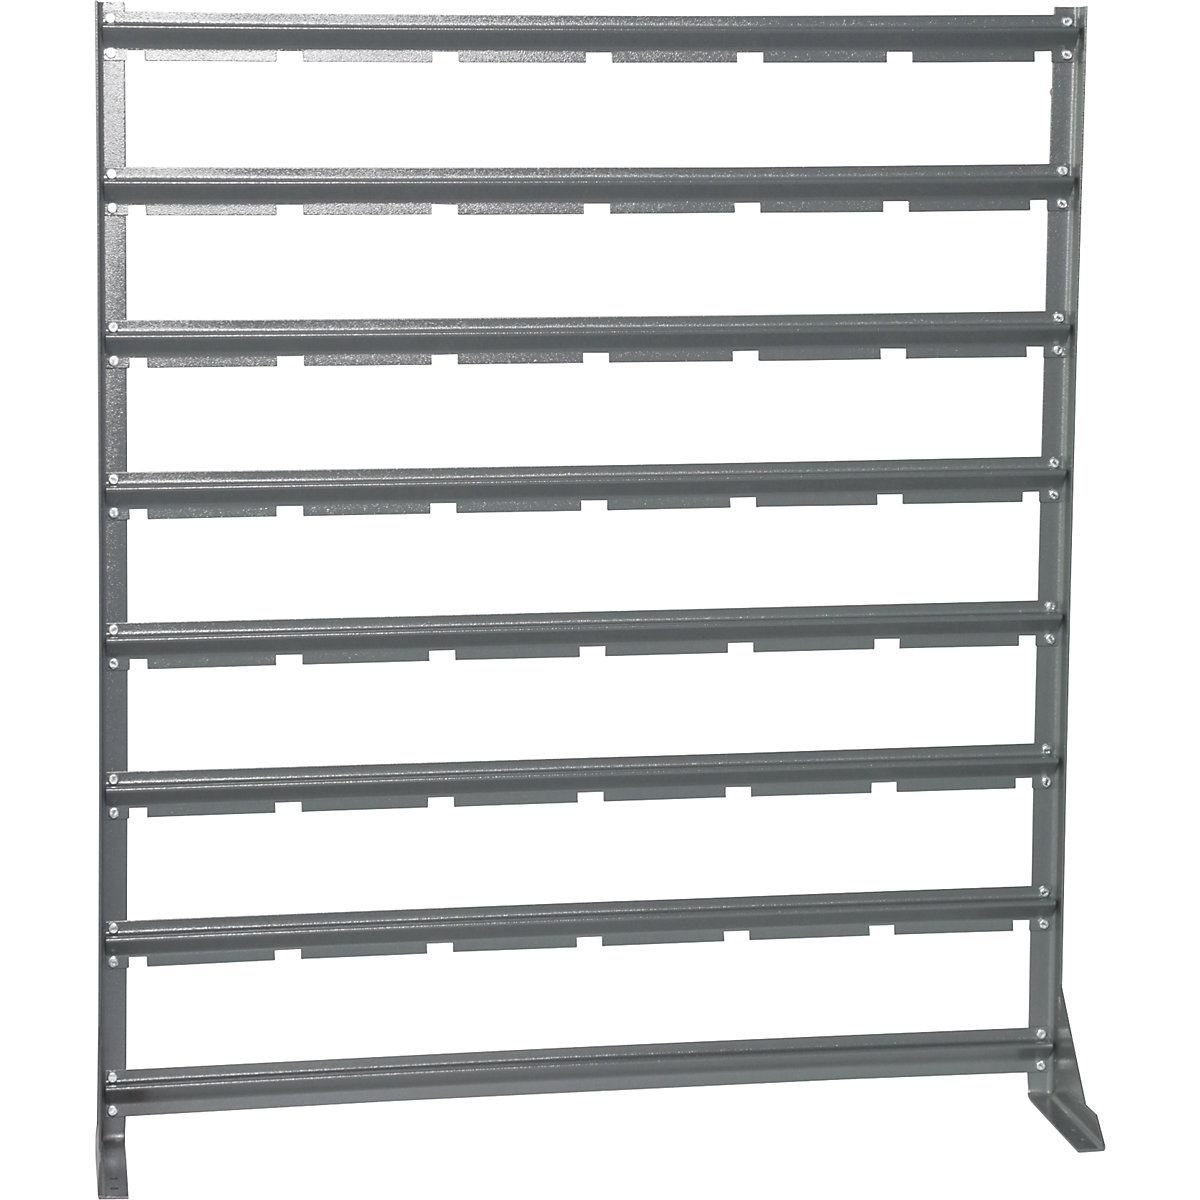 Small parts shelf unit, width 1020 mm, without open fronted storage bins, HxD 1160 x 235 mm-7